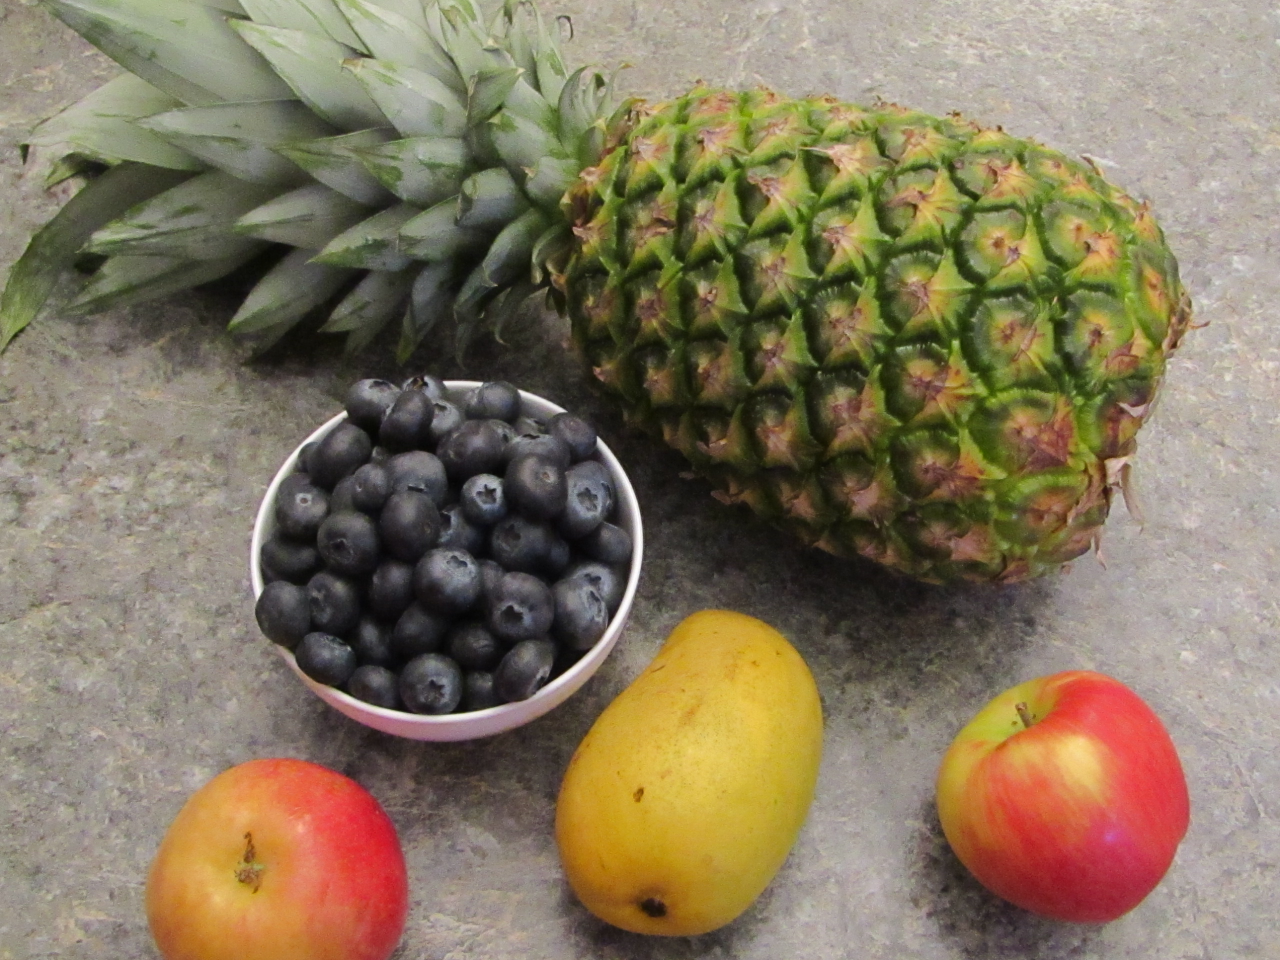 An arraingement of pineapple, blueberries in a bowl, two apples and a mango on a counter